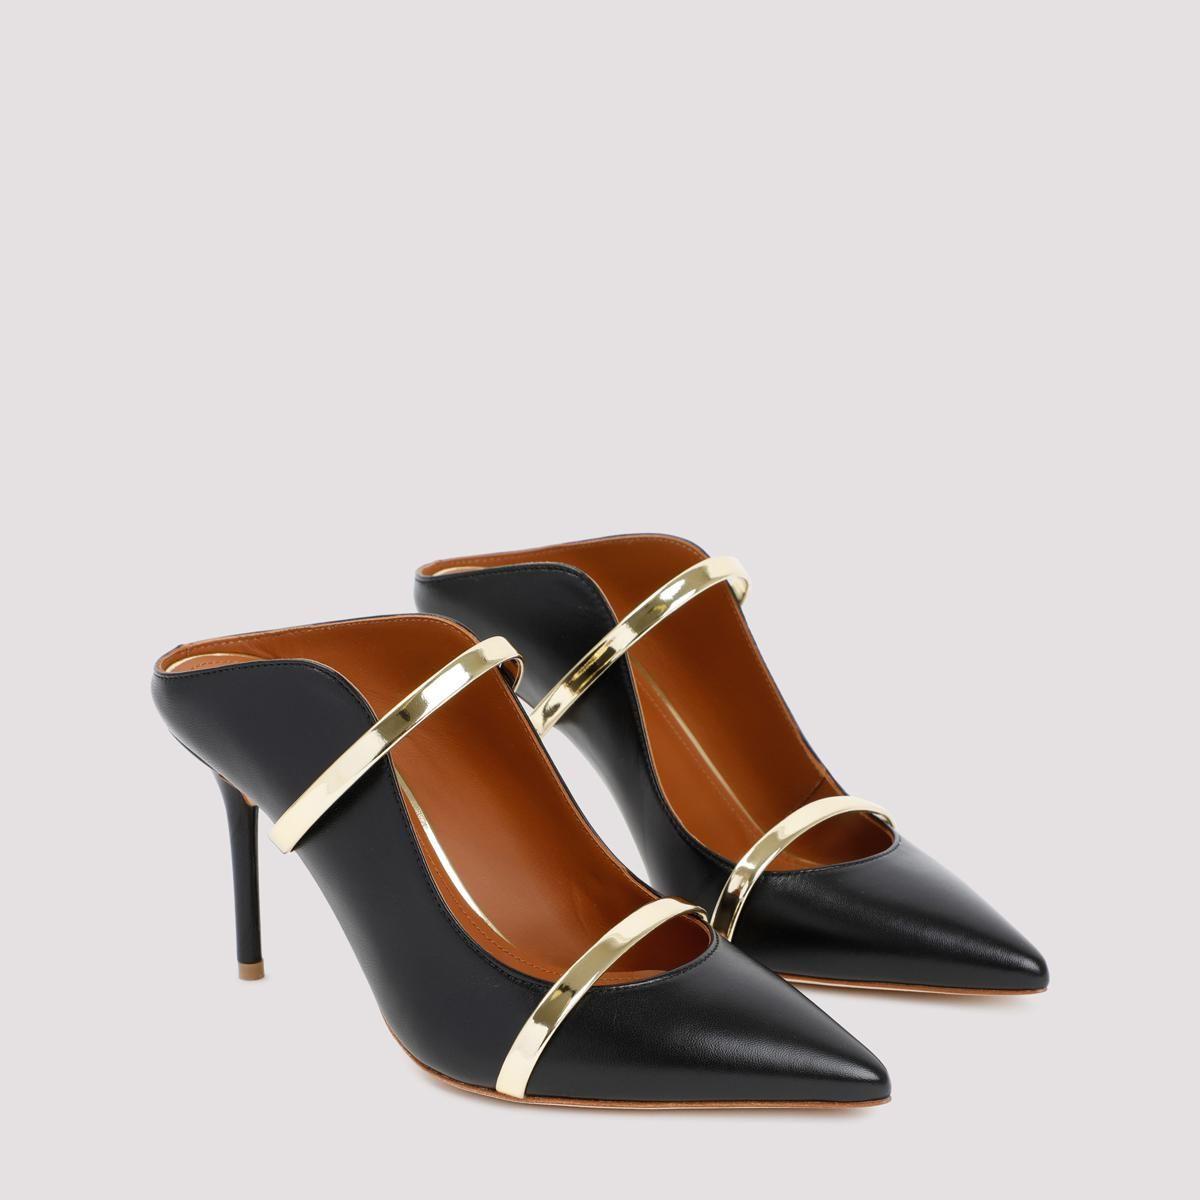 Malone Souliers Maureen 85 Mules Shoes in Black | Lyst